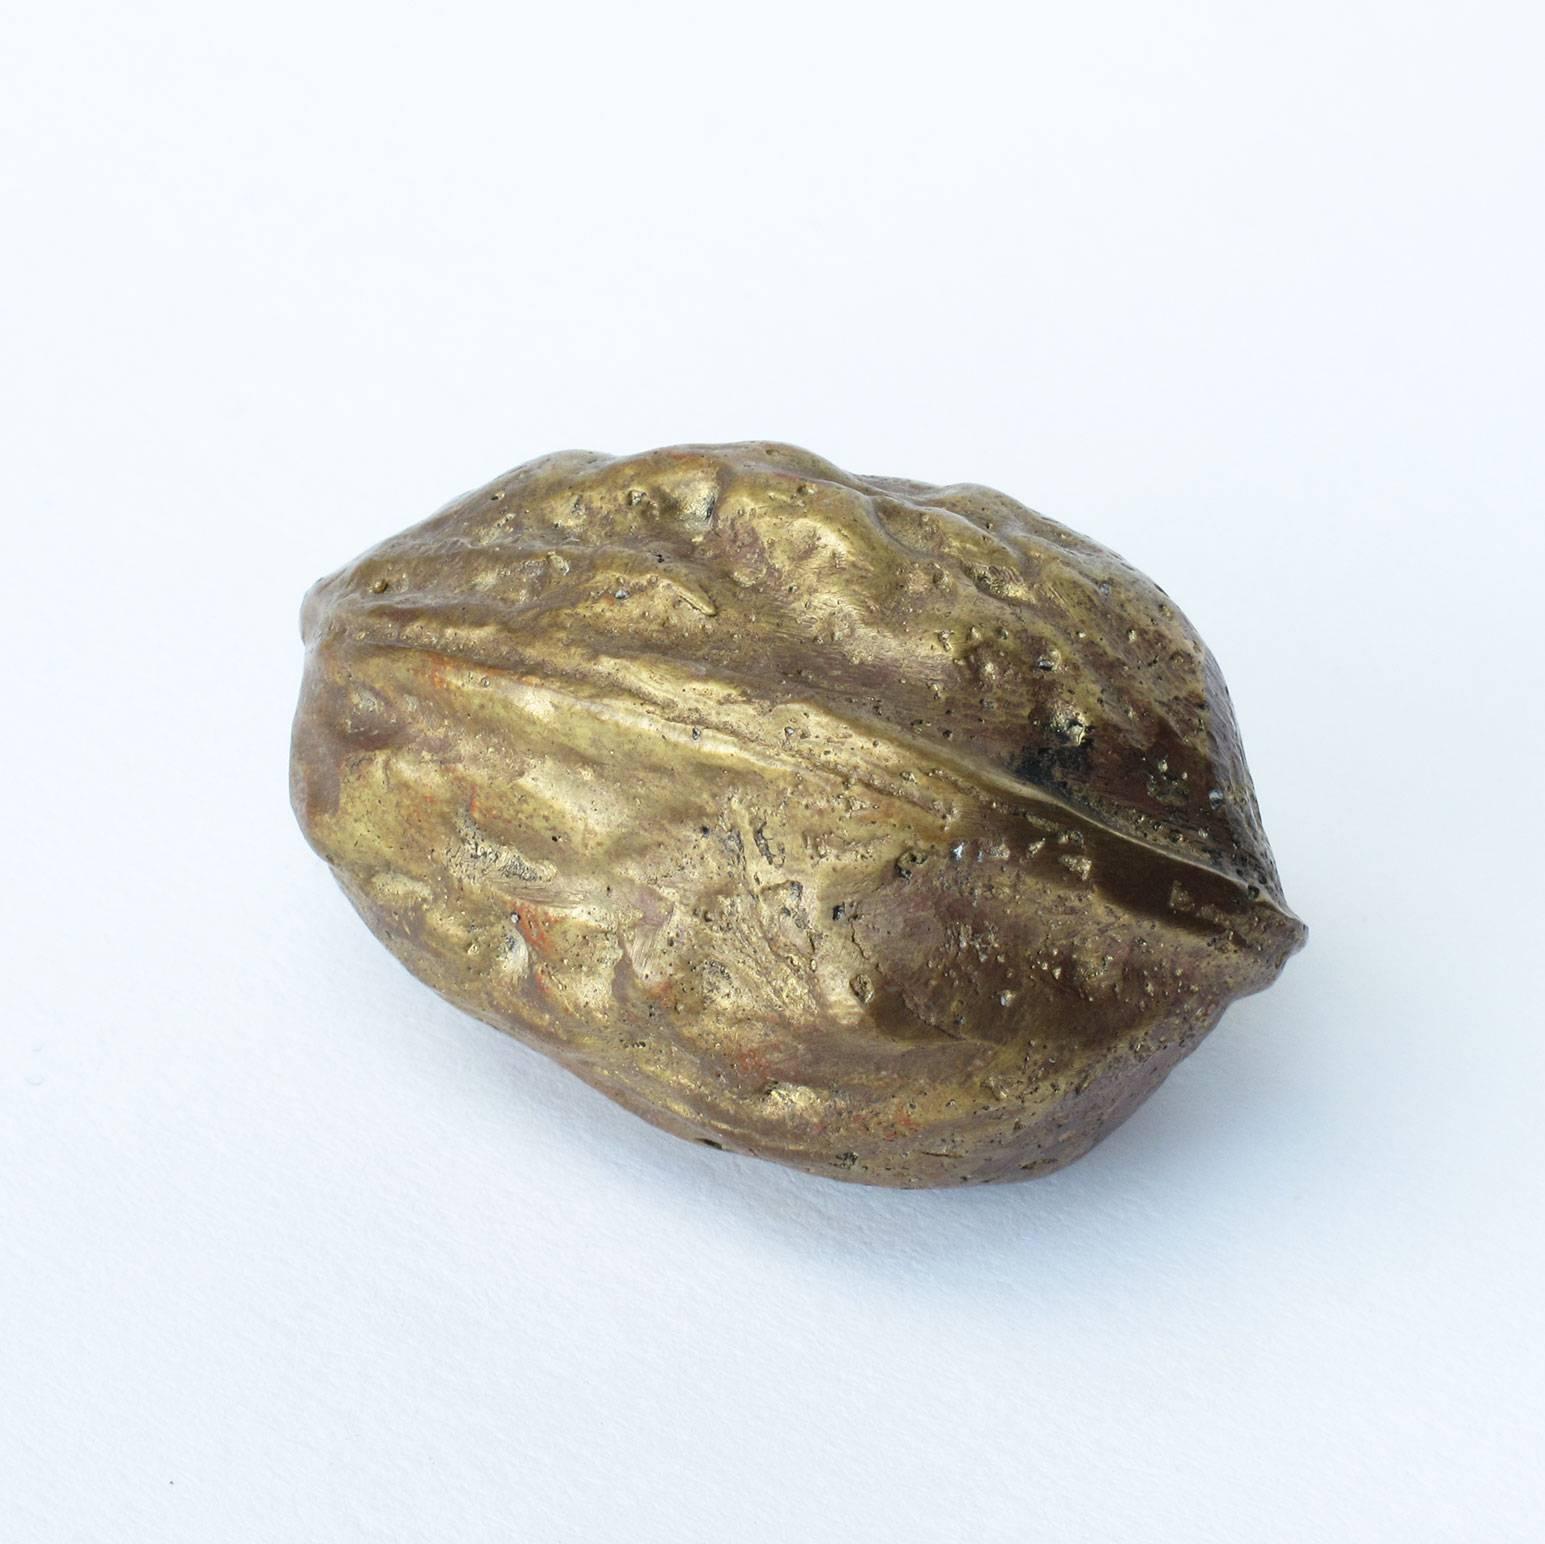 Carl Auböck design object paperweight in the form of a walnut, solid brass, signed, 1950s, Werkstätte Auböck, Austria. Measures: 1 x 1.13 x 1.75 inches.